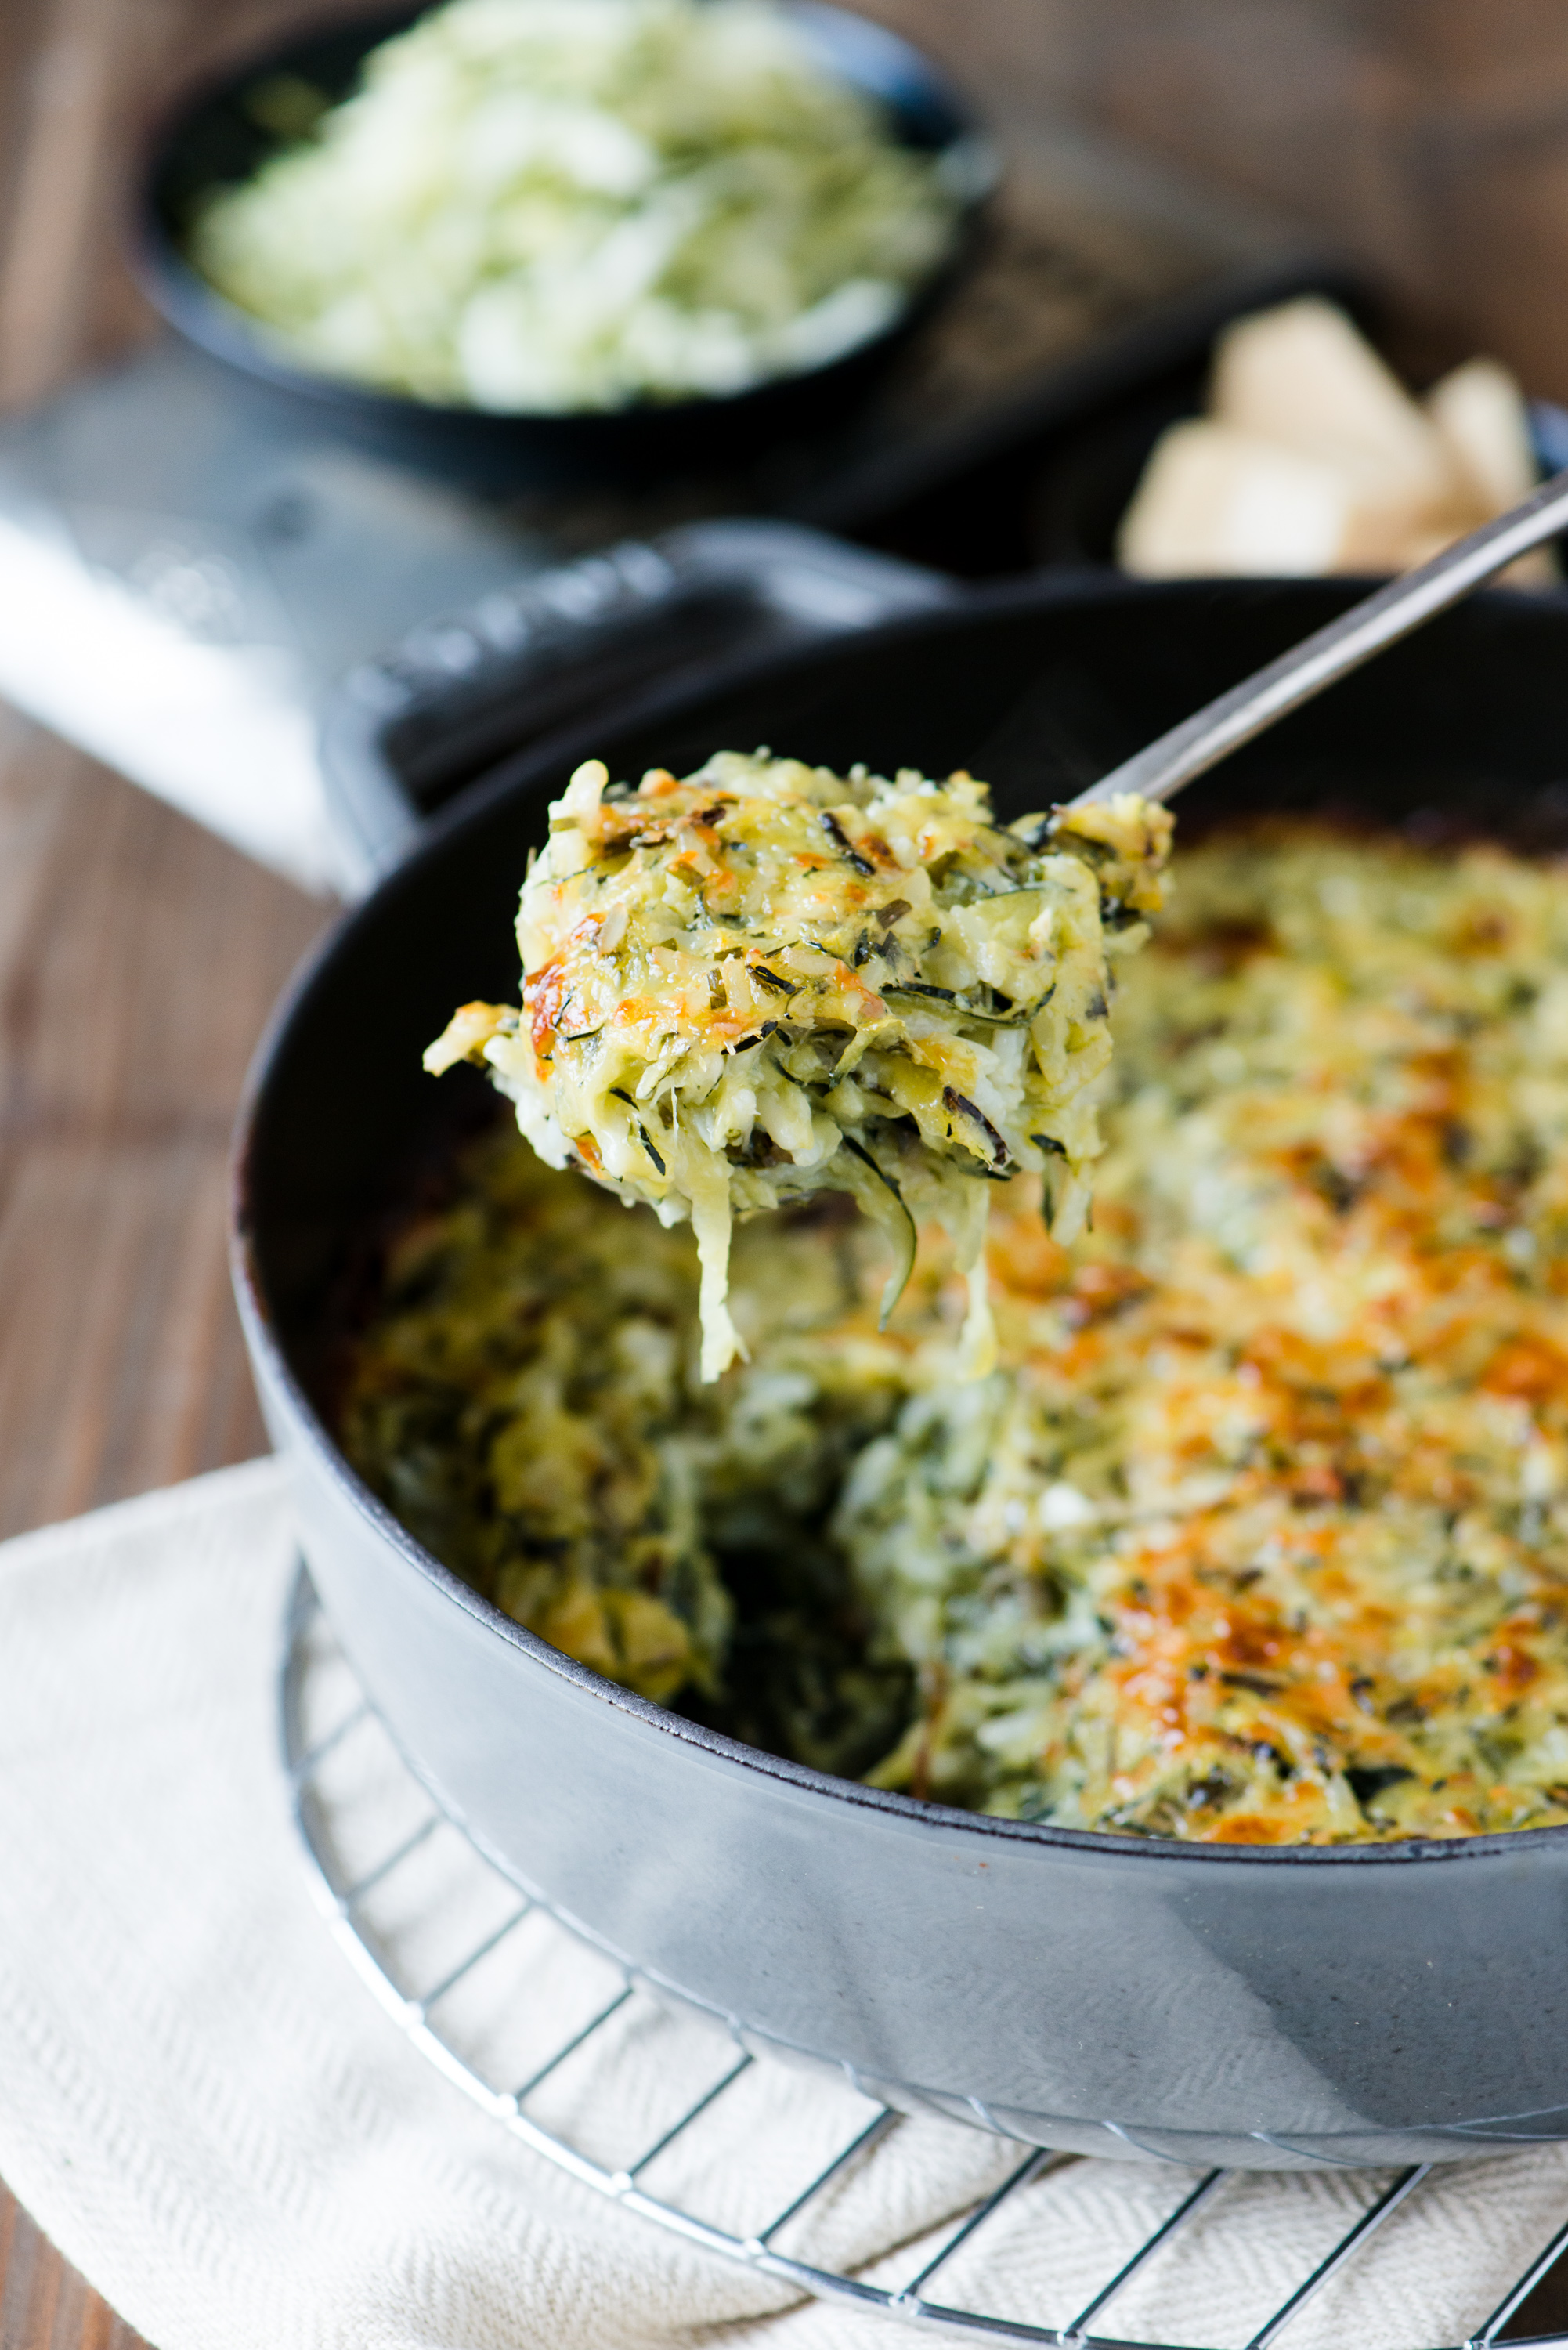 Zucchini & Wild Rice Gratin - So rich & creamy, you'd never guess there was no butter or cream in it!